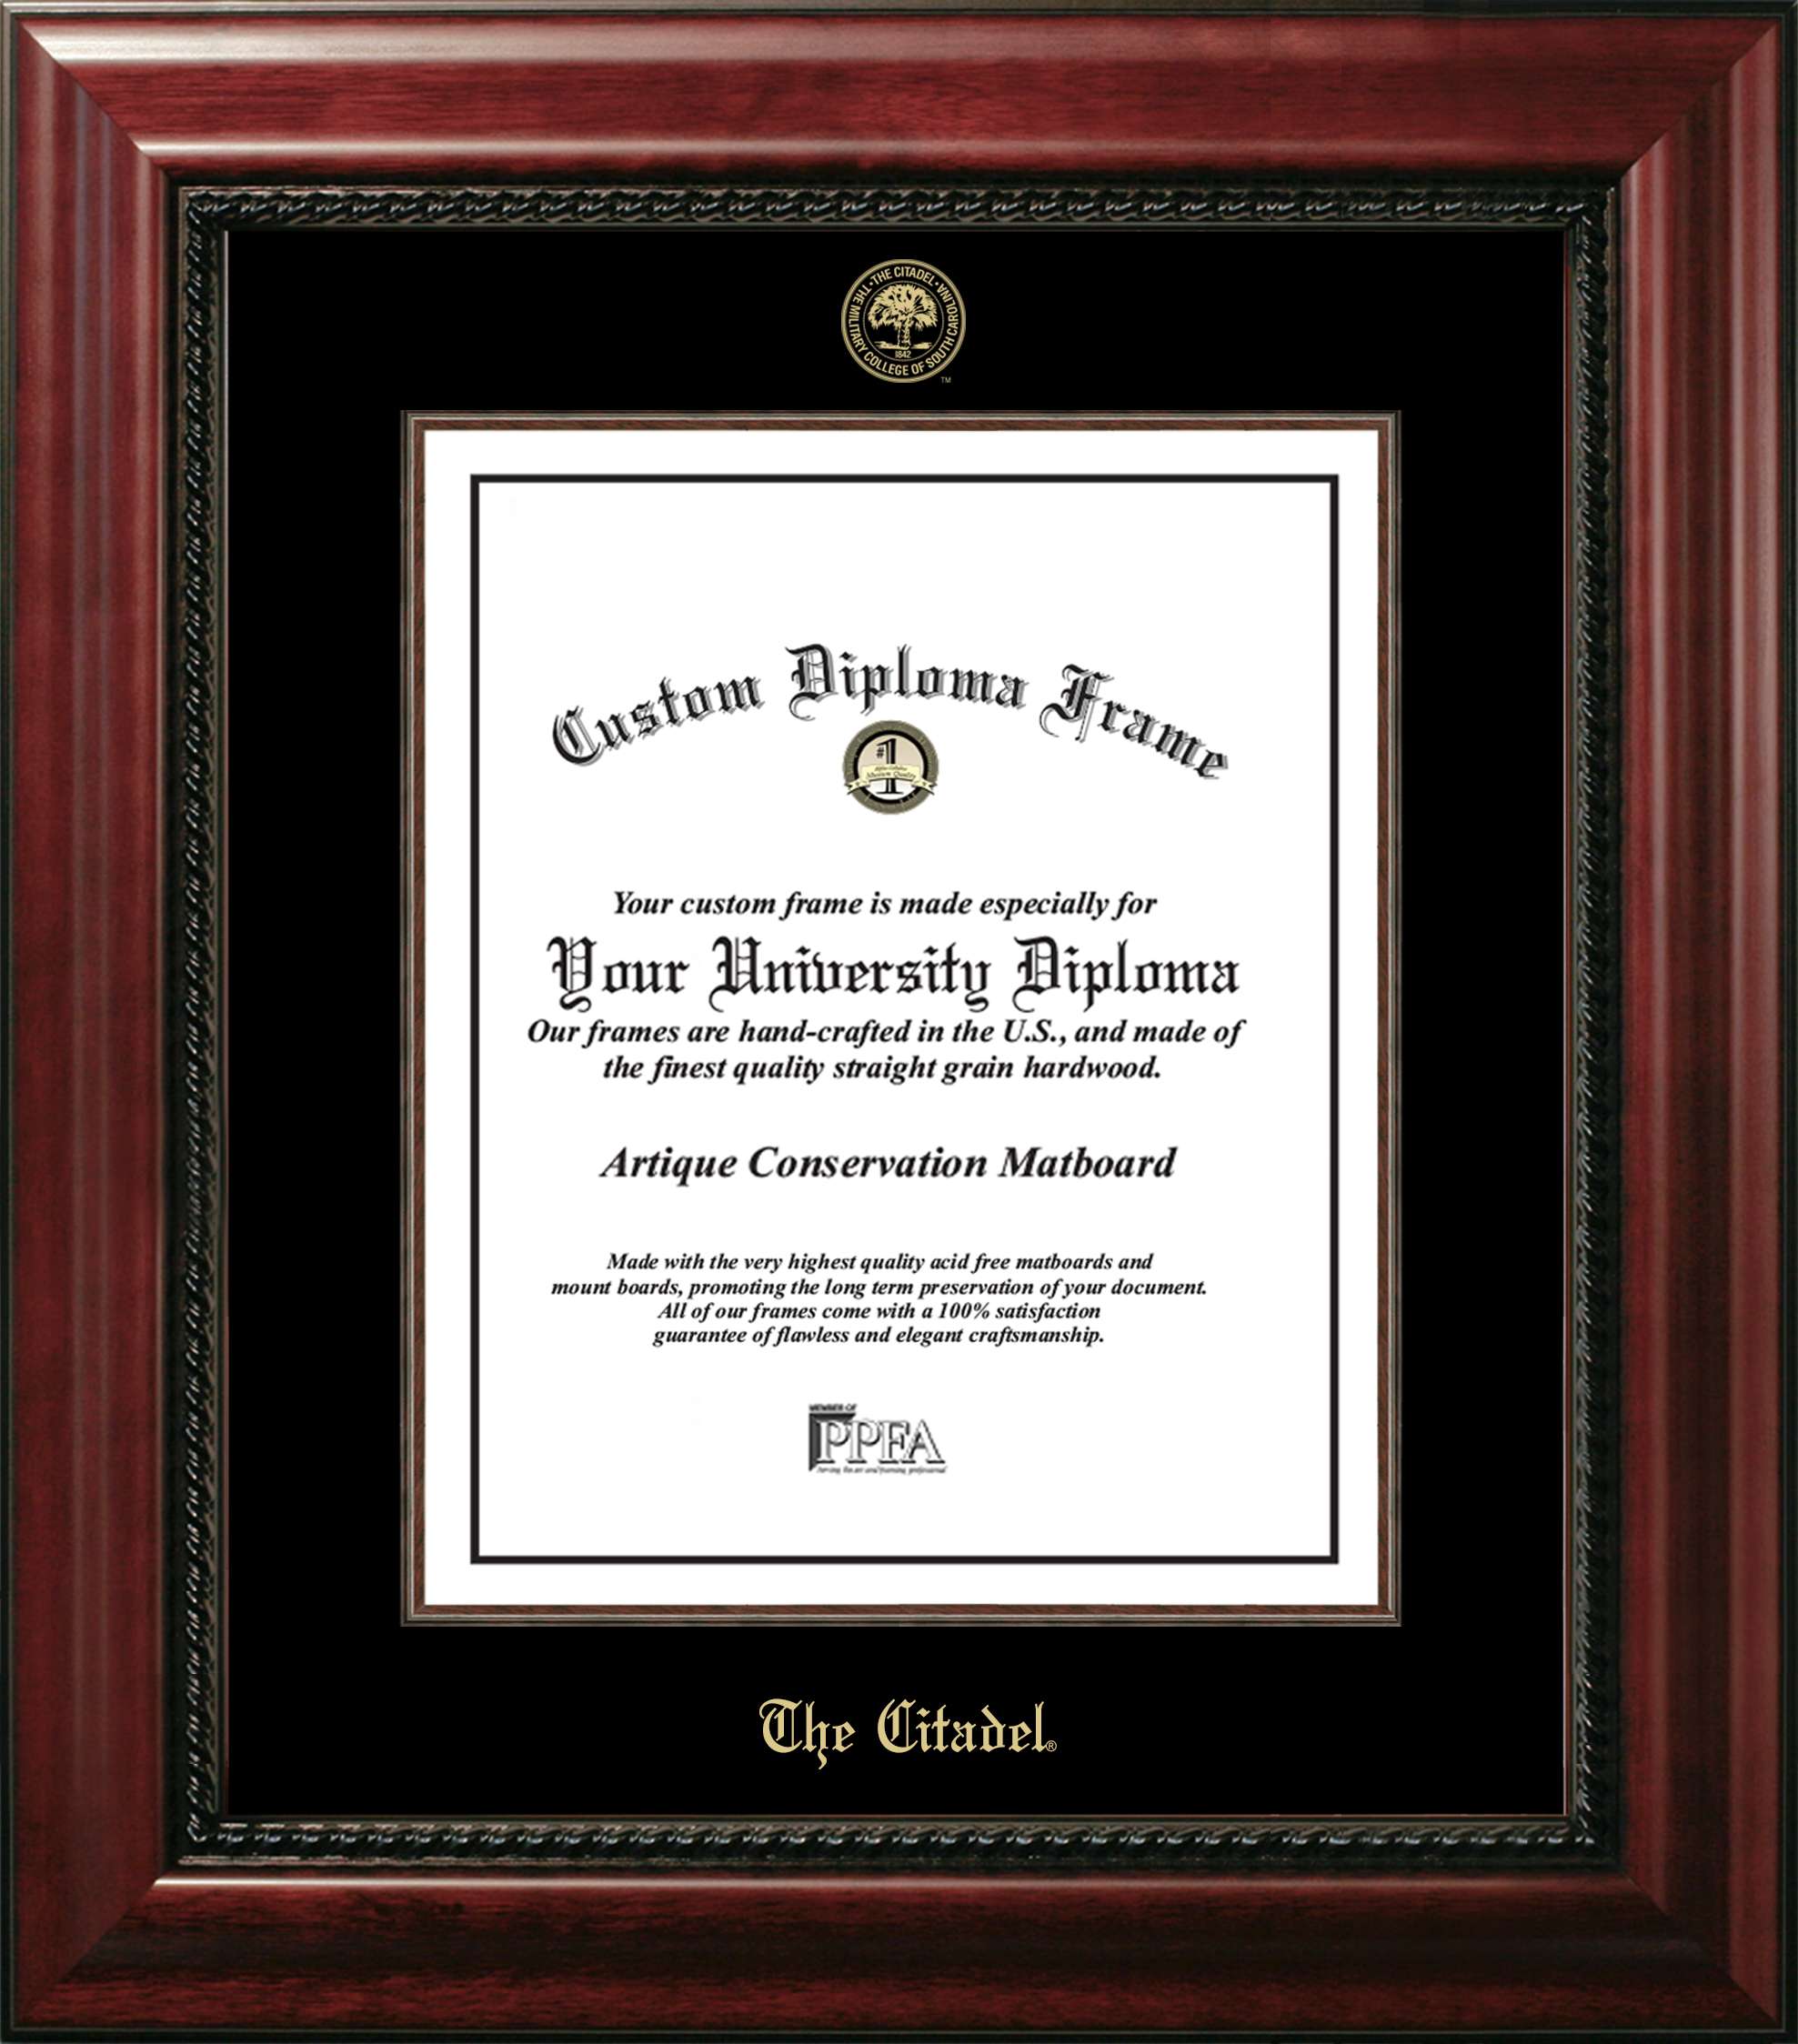 Campus Images The Citadel 16w X 20h Executive Diploma Frame